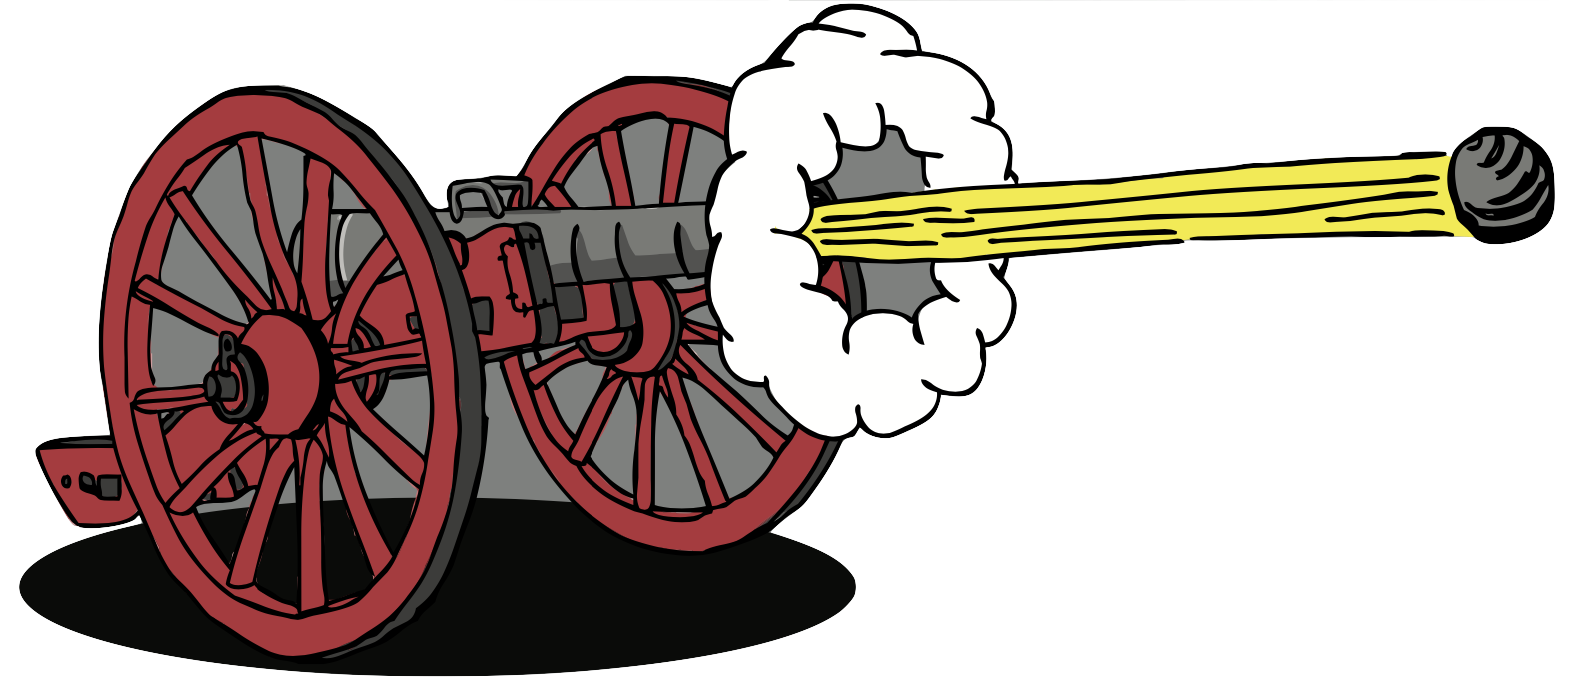 graphic image of a cannon firing a cannonball